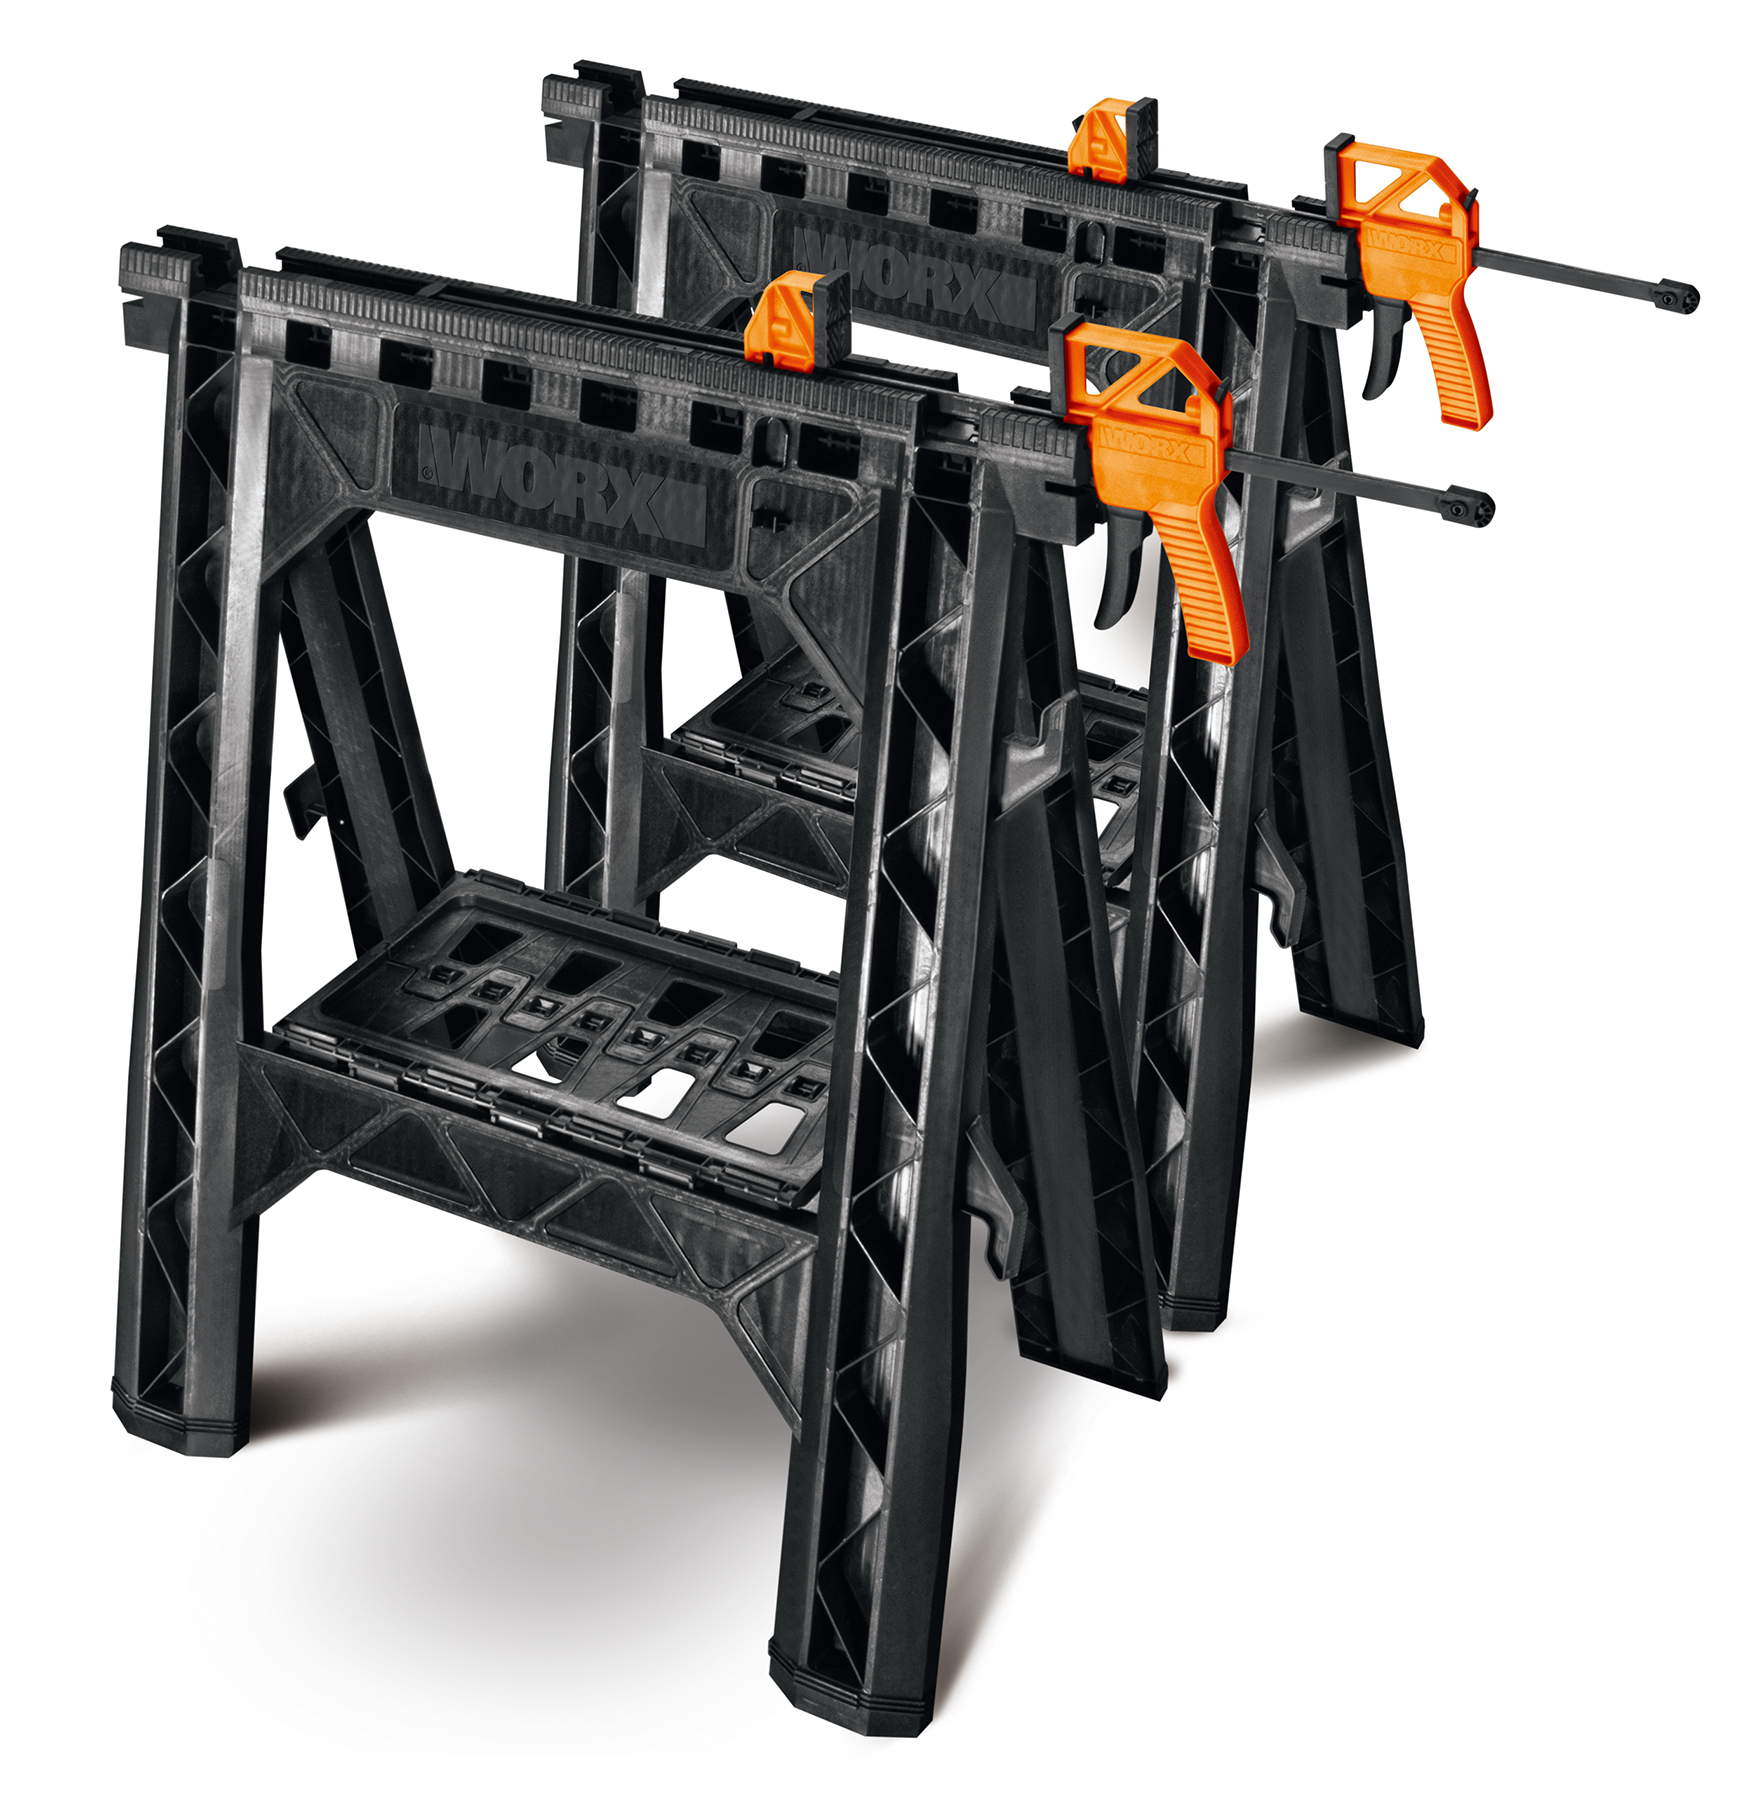 Two 18-inch bar clamps fasten without tools to WORX Clamping Sawhorses.